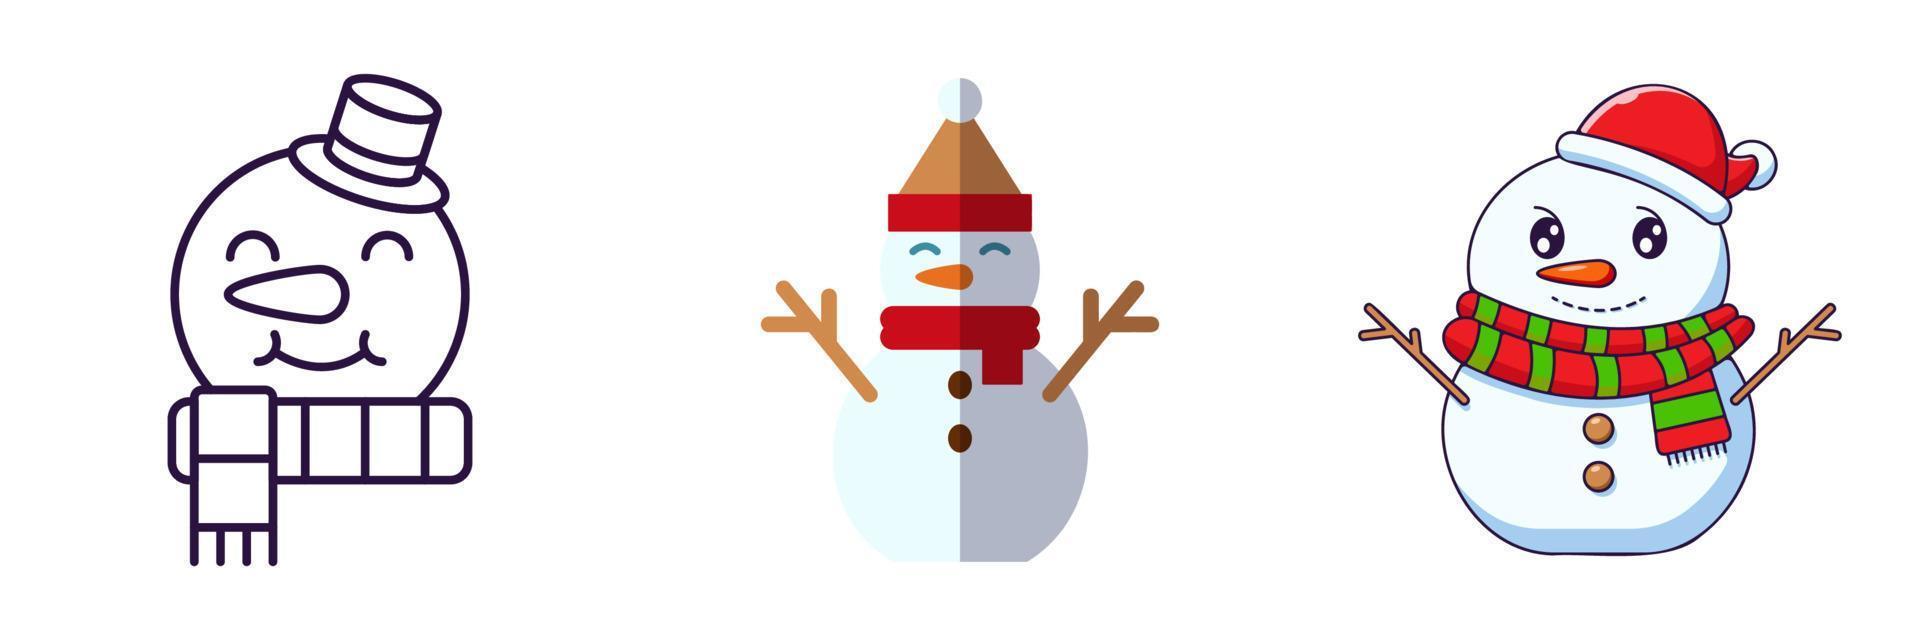 Merry Christmas and Happy New Year concept. Collection of icon of snowman in line, flat and cartoon styles for web sites, adverts, articles, shops, stores vector